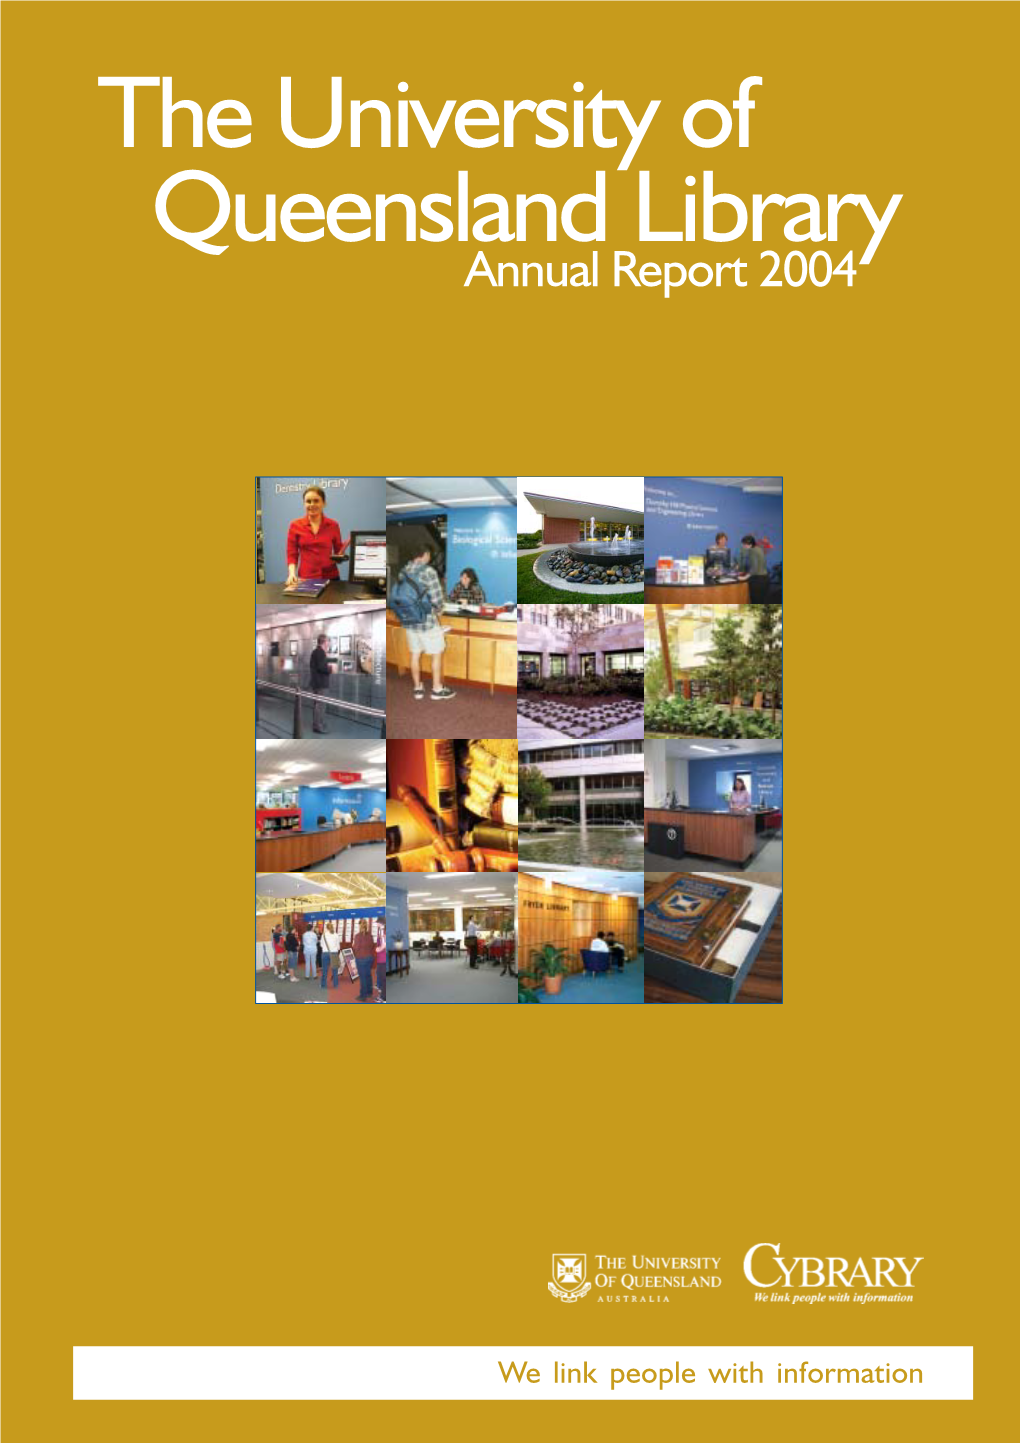 The University of Queensland Library Annual Report 2004